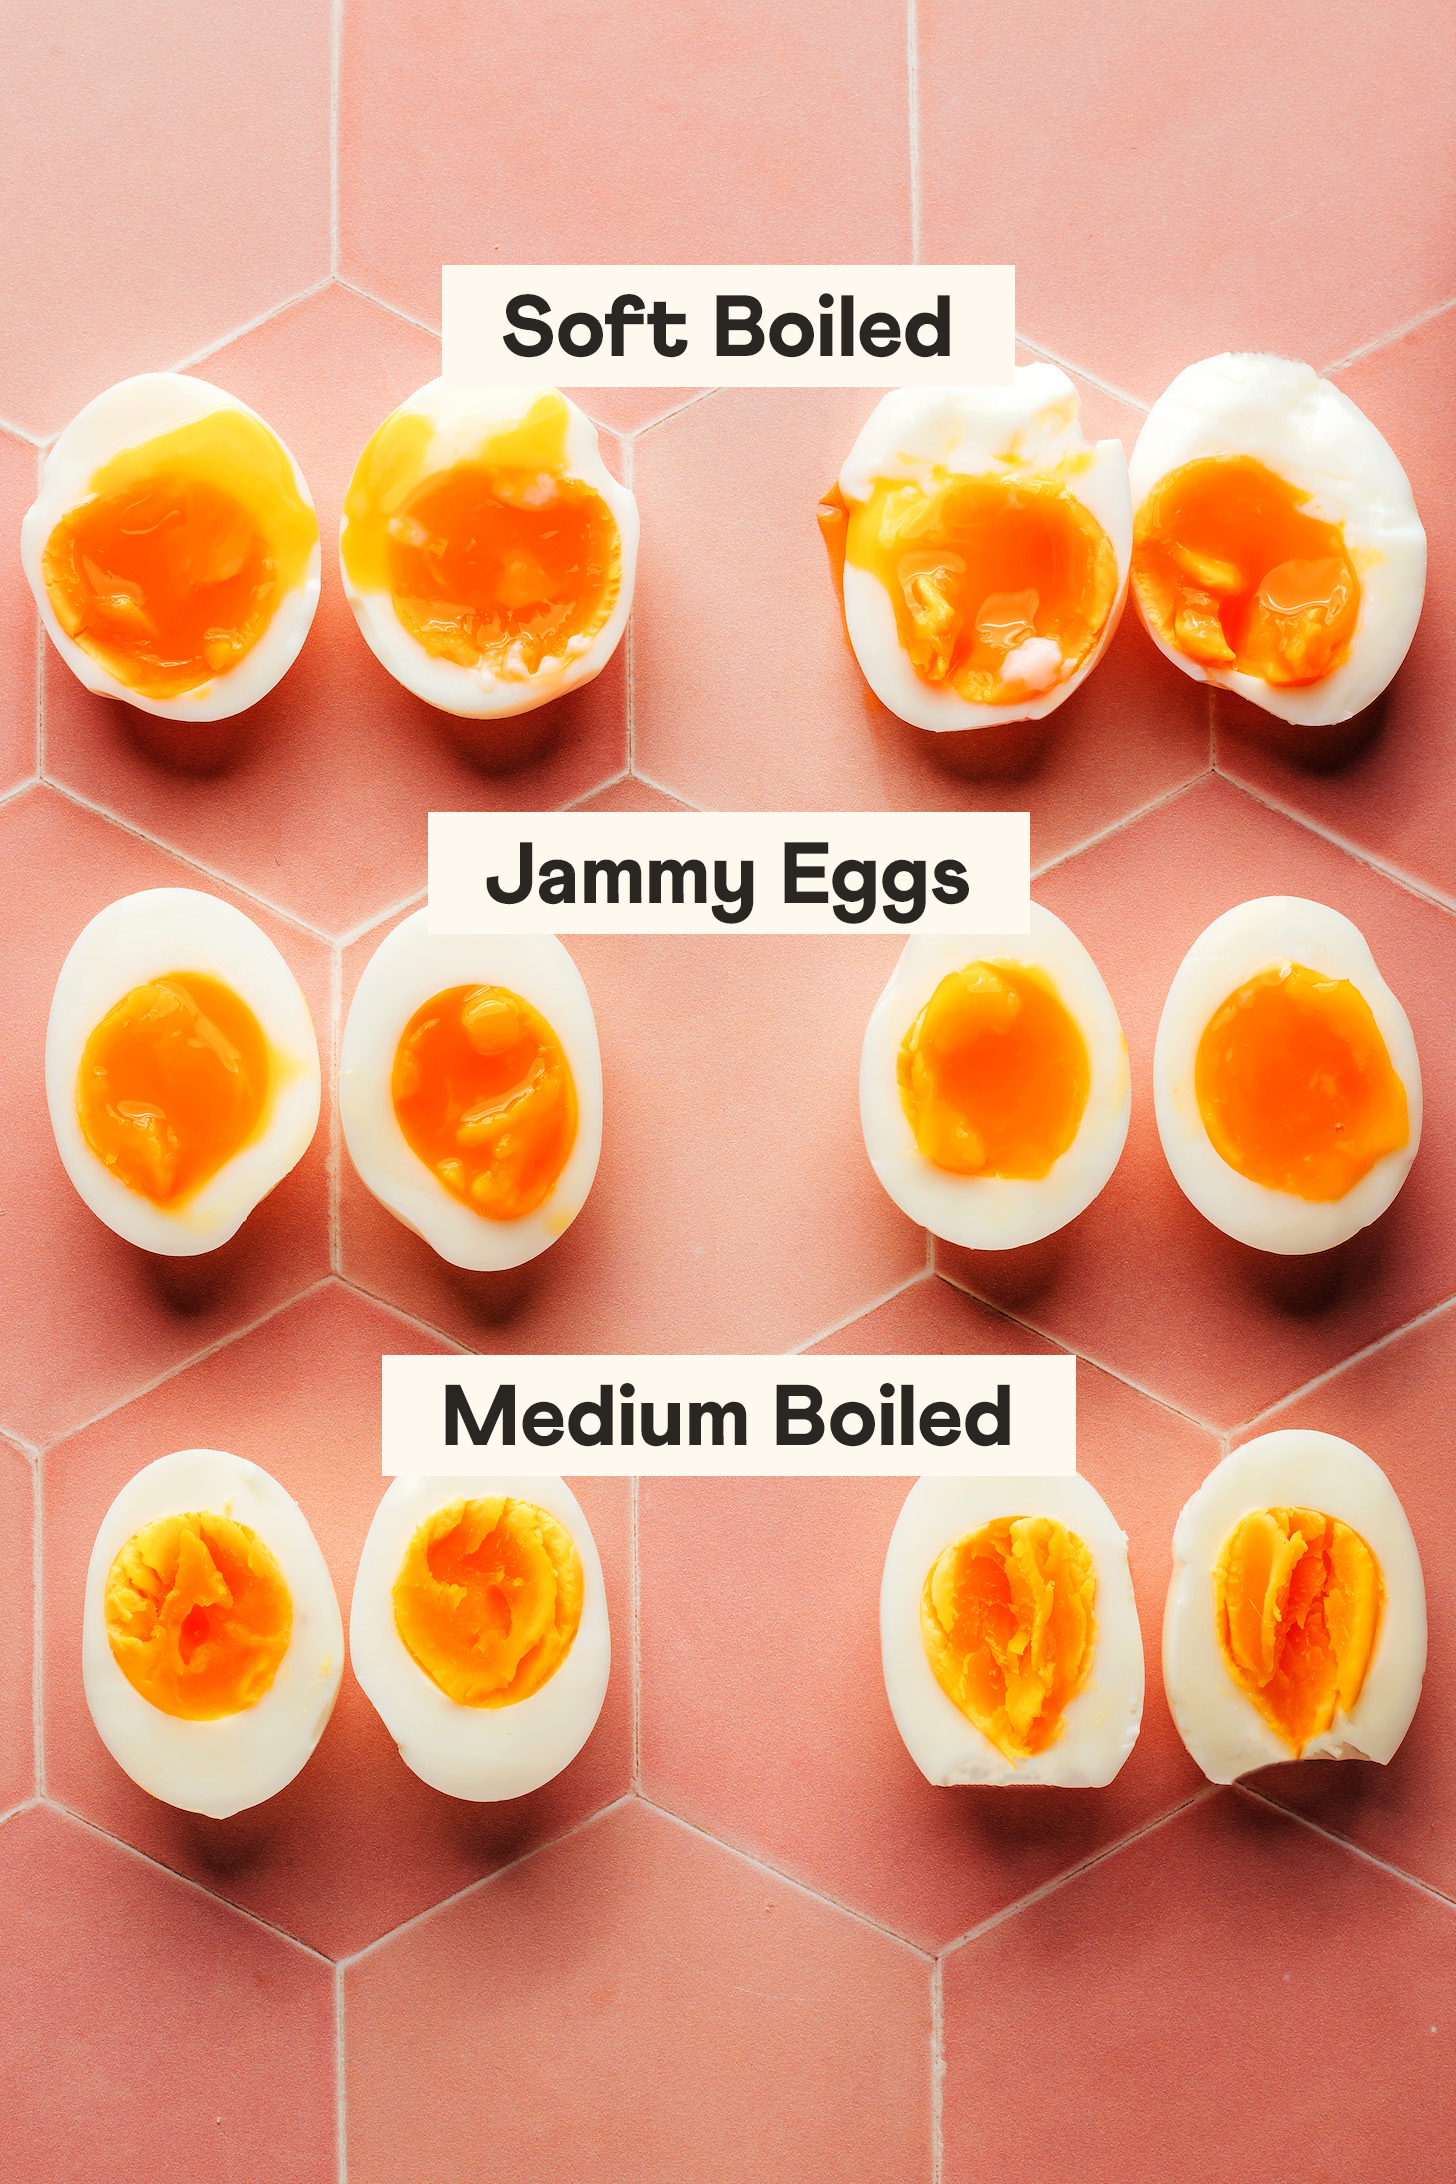 Soft boiled, medium boiled, and jammy eggs with text above them